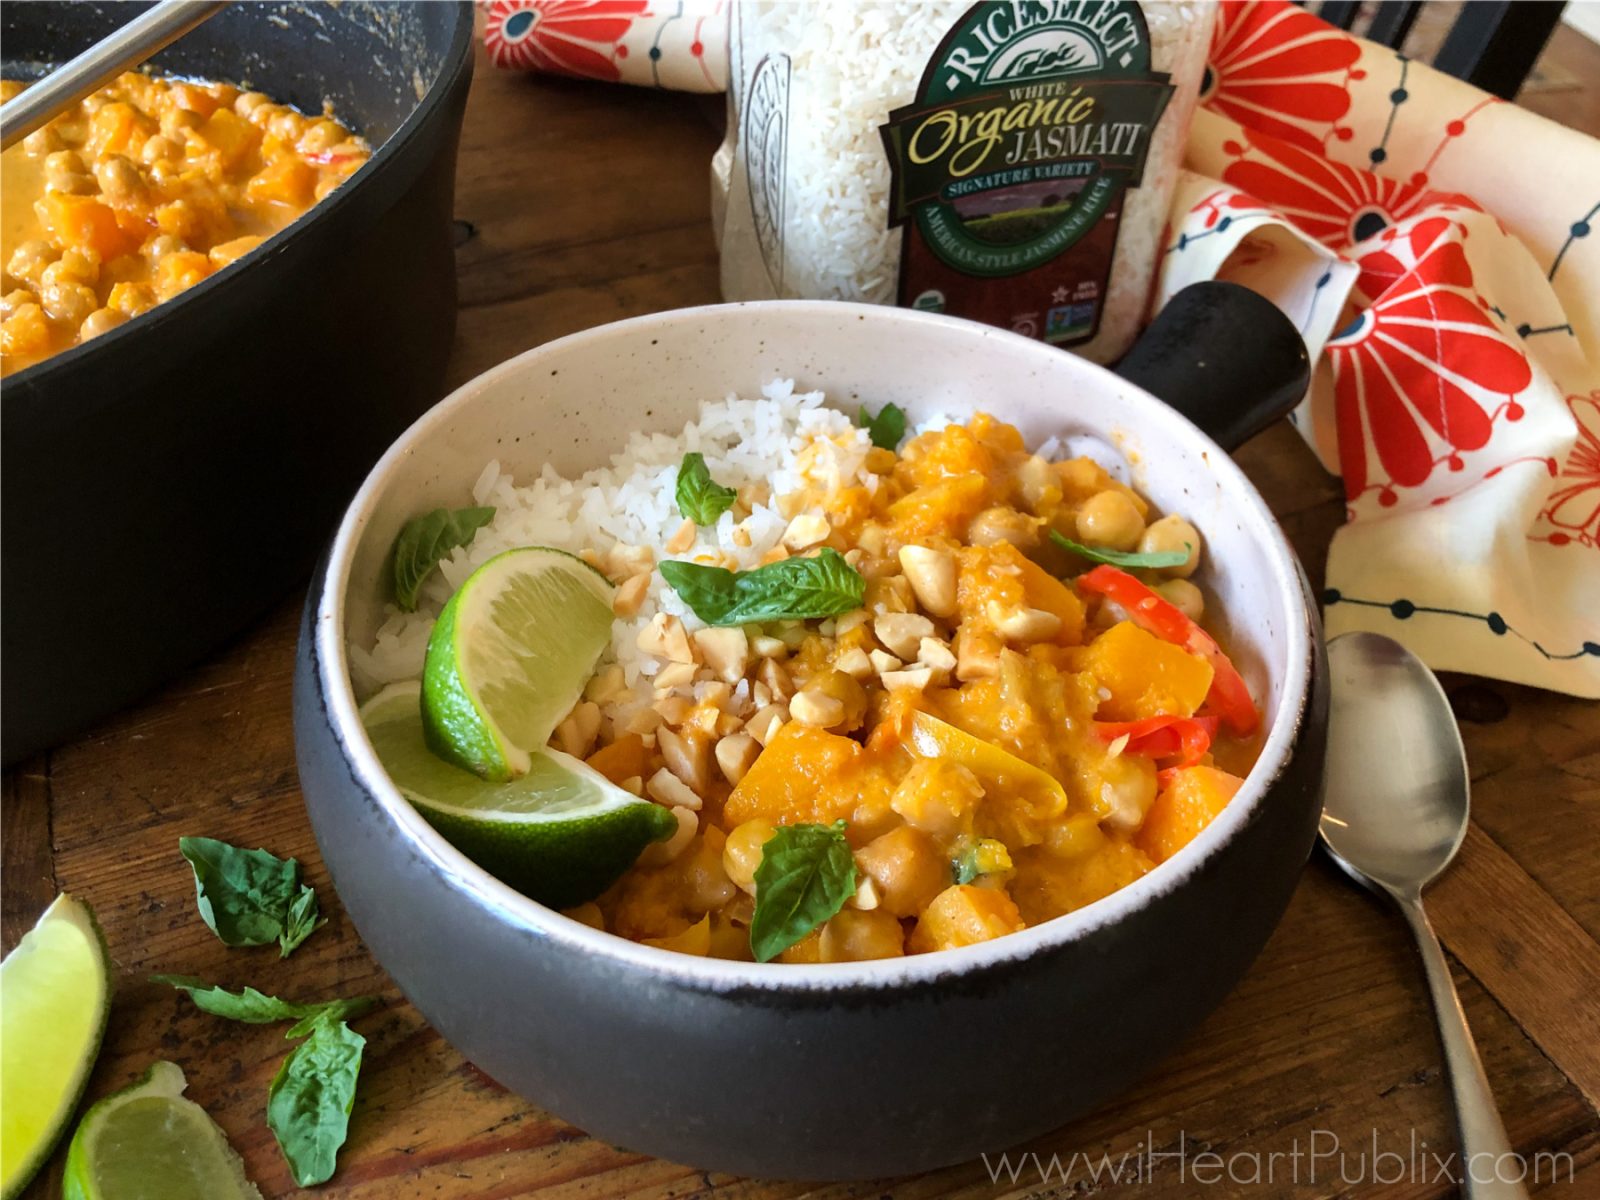 Easy Butternut & Chickpea Curry Over RiceSelect Organic Jasmati Rice